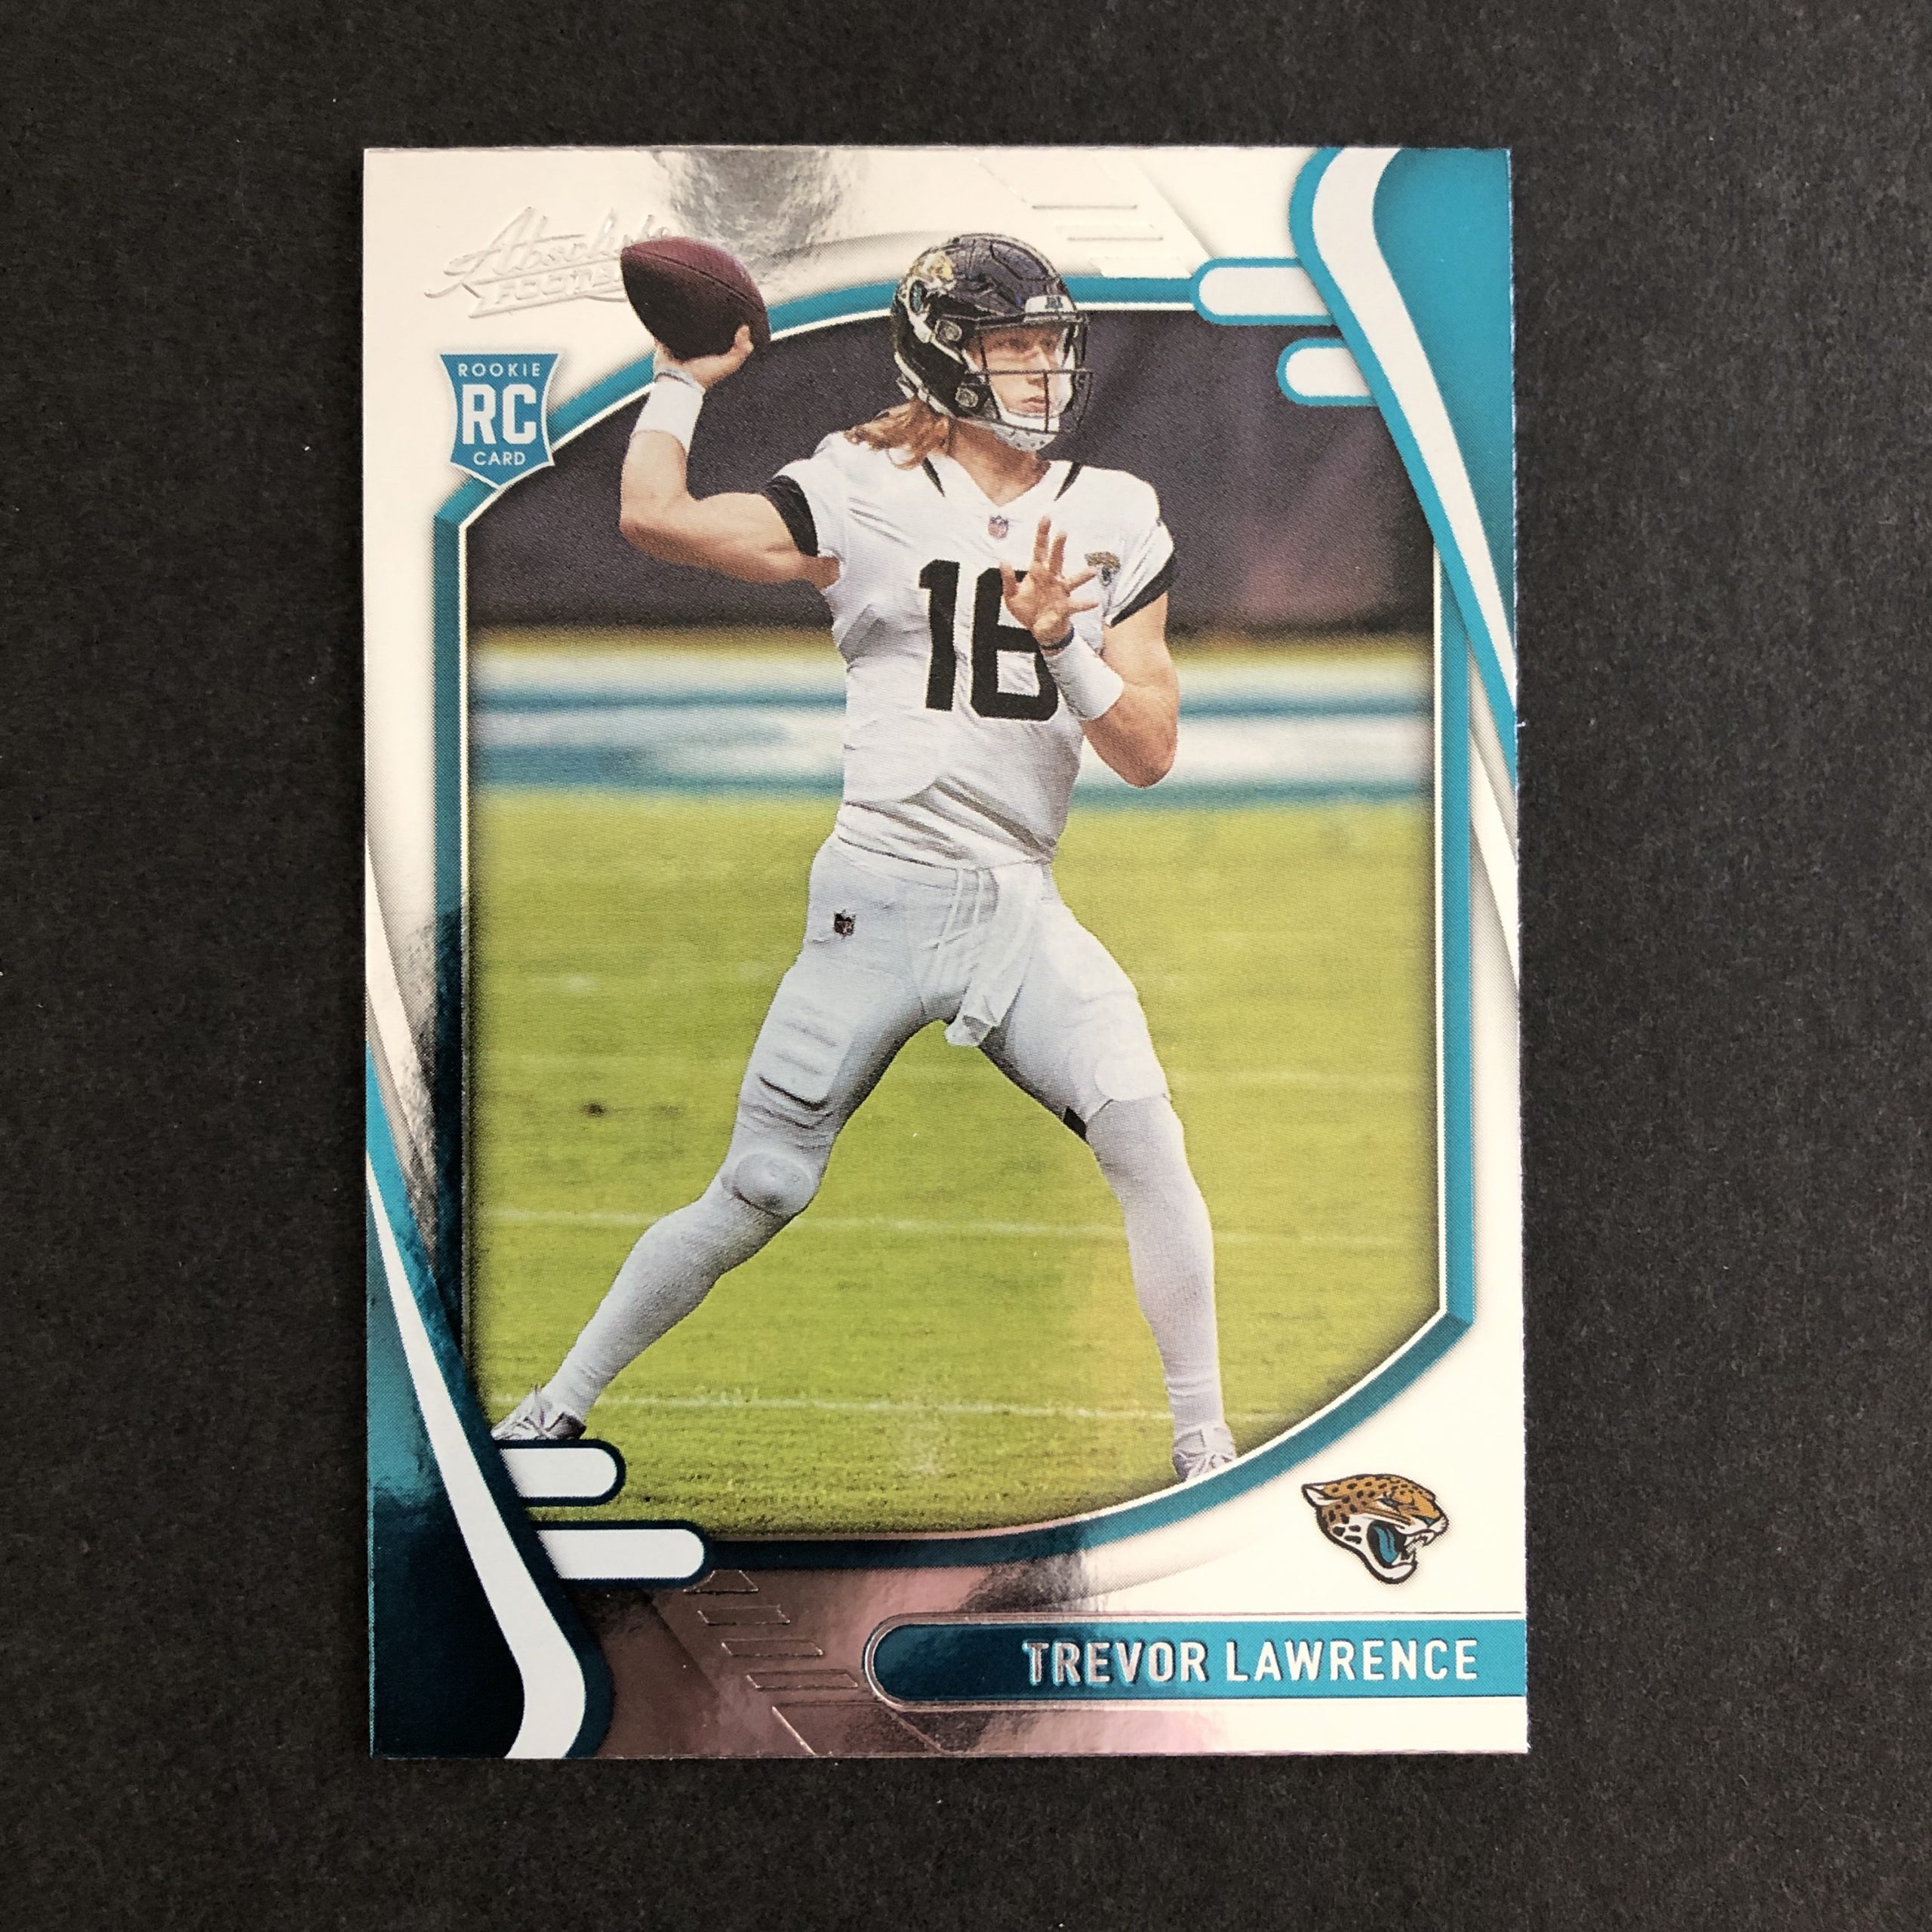 Trevor Lawrence 2021 Absolute Rookie Card